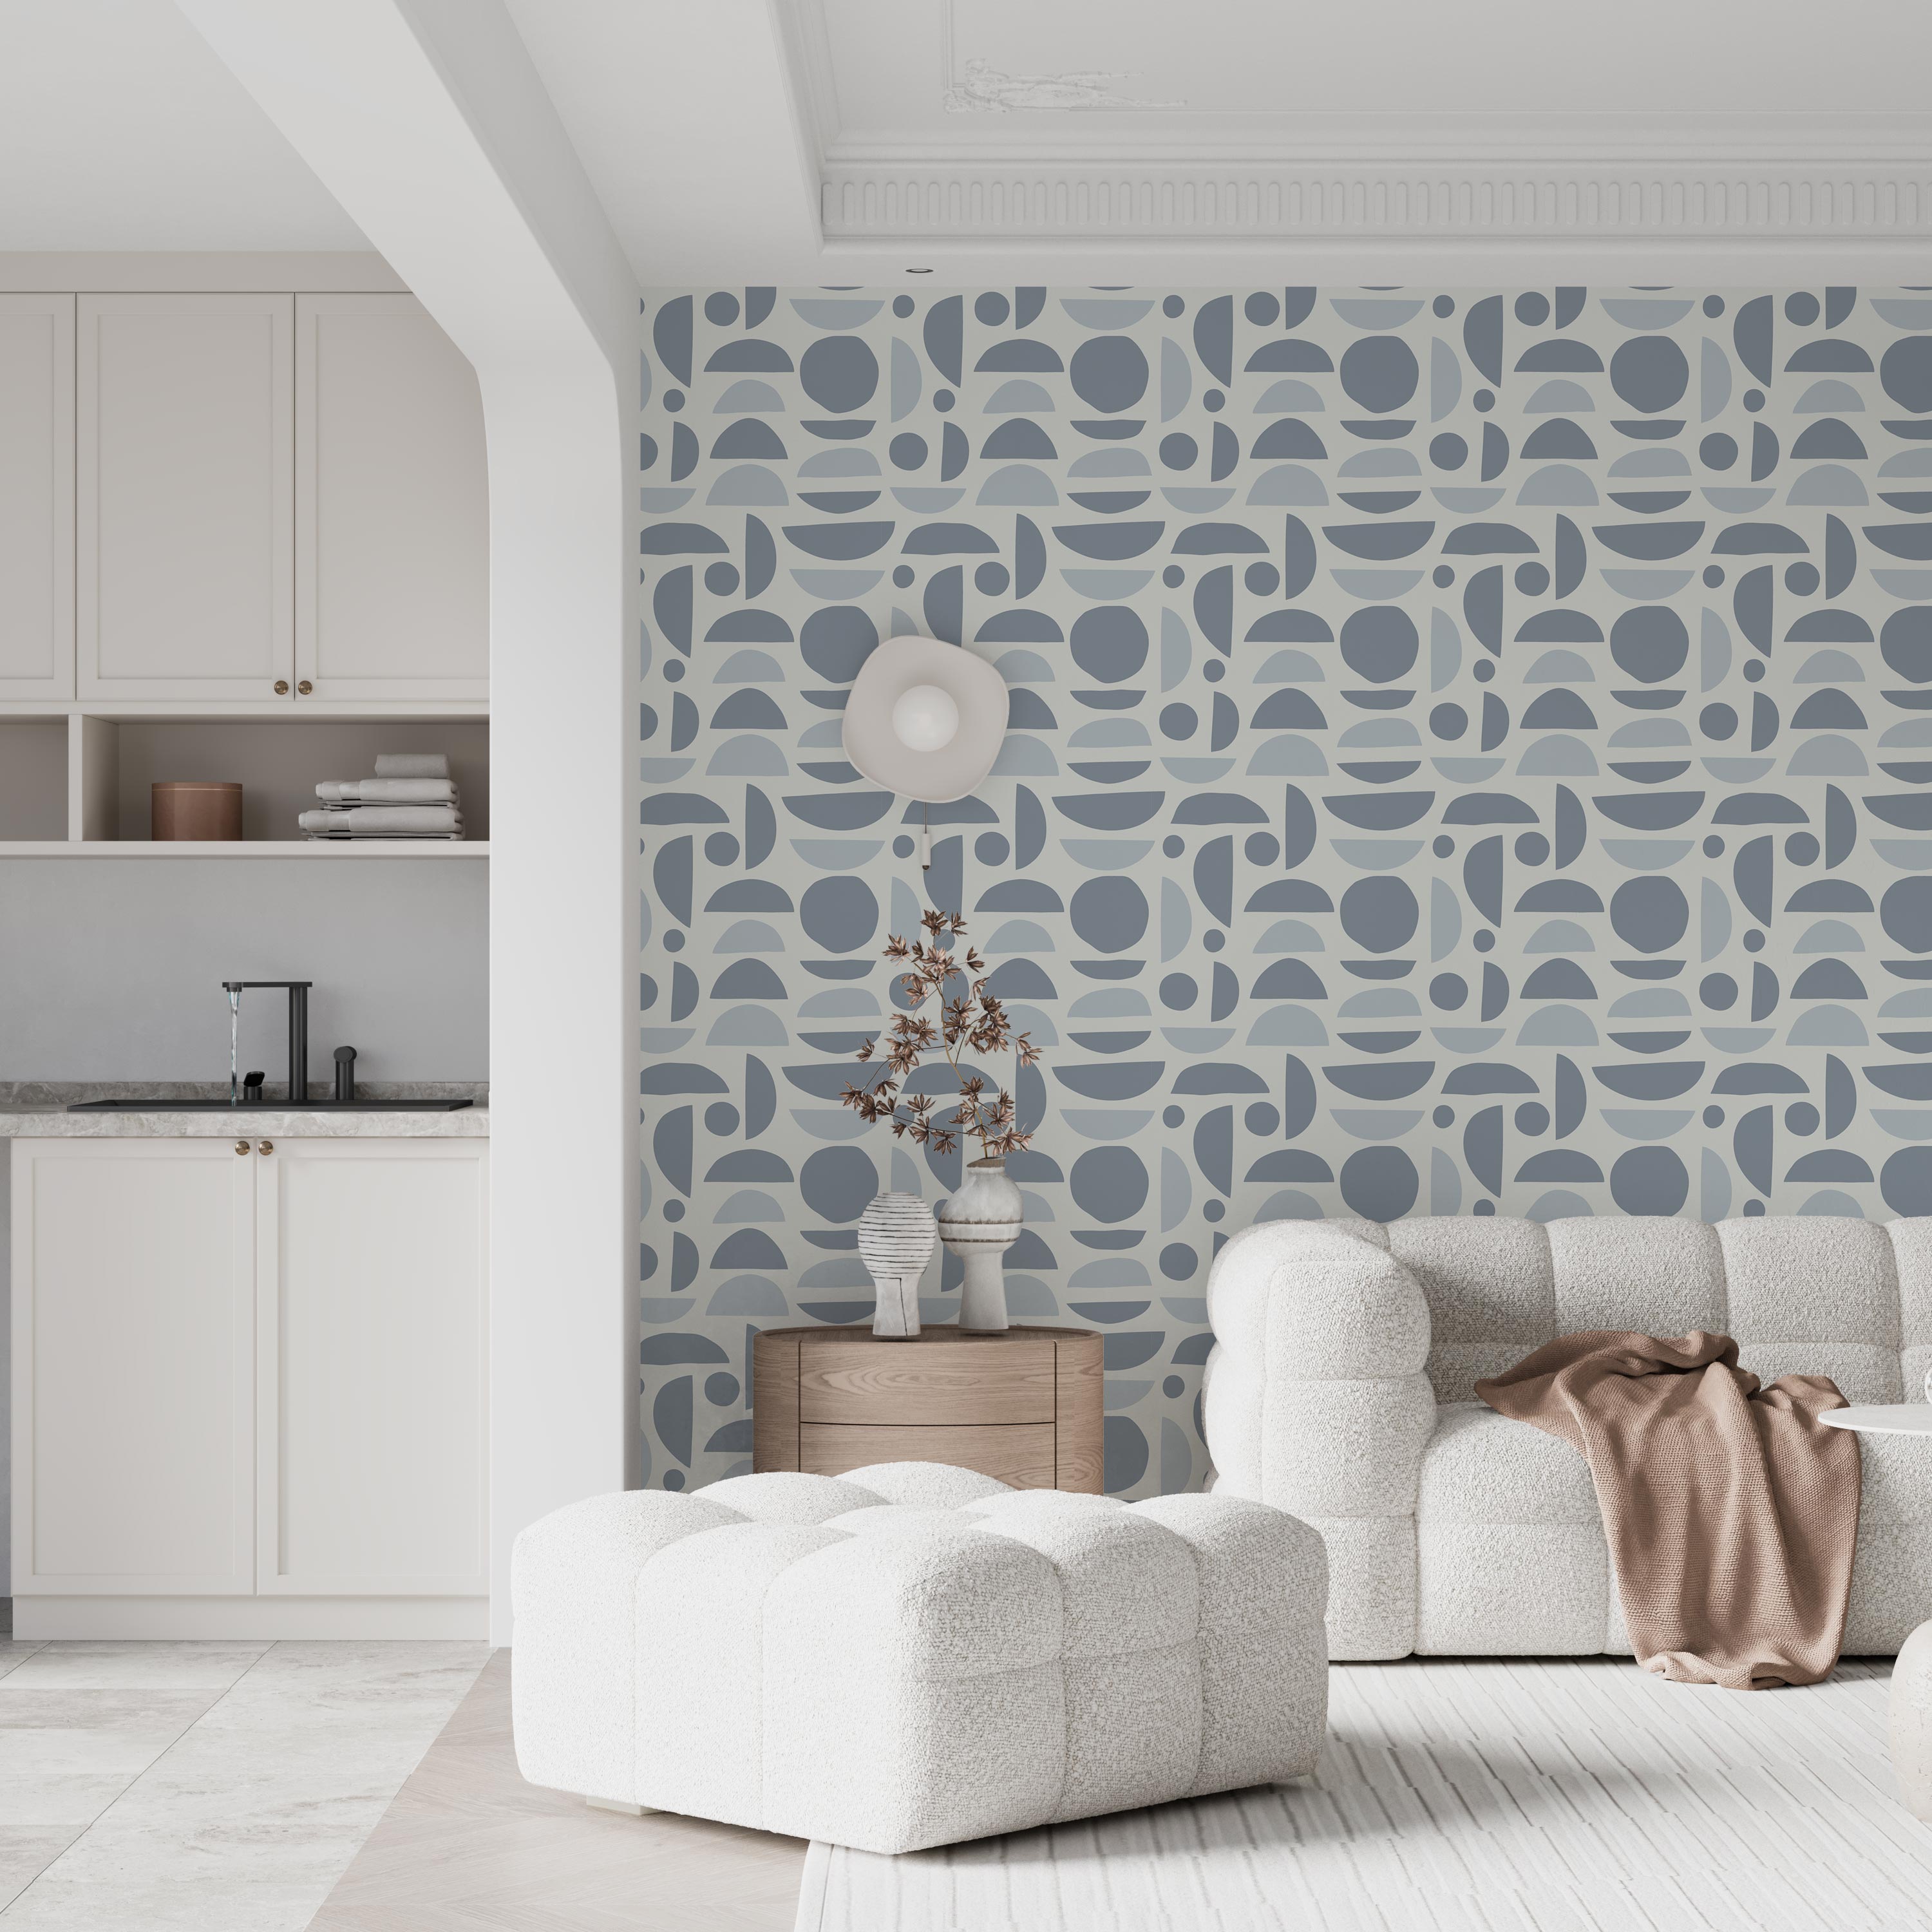 files/A-sophisticated-living-room-adorned-with-classic-blue-peel-and-stick-wallpaper_-creating-a-tranquil-focal-point.-The-delicate-geometric-pattern-blends-harmoniously-with-the-room_s-dec_a57f0650-13ad-4a3c-9d0f-ed2dad546c36.jpg